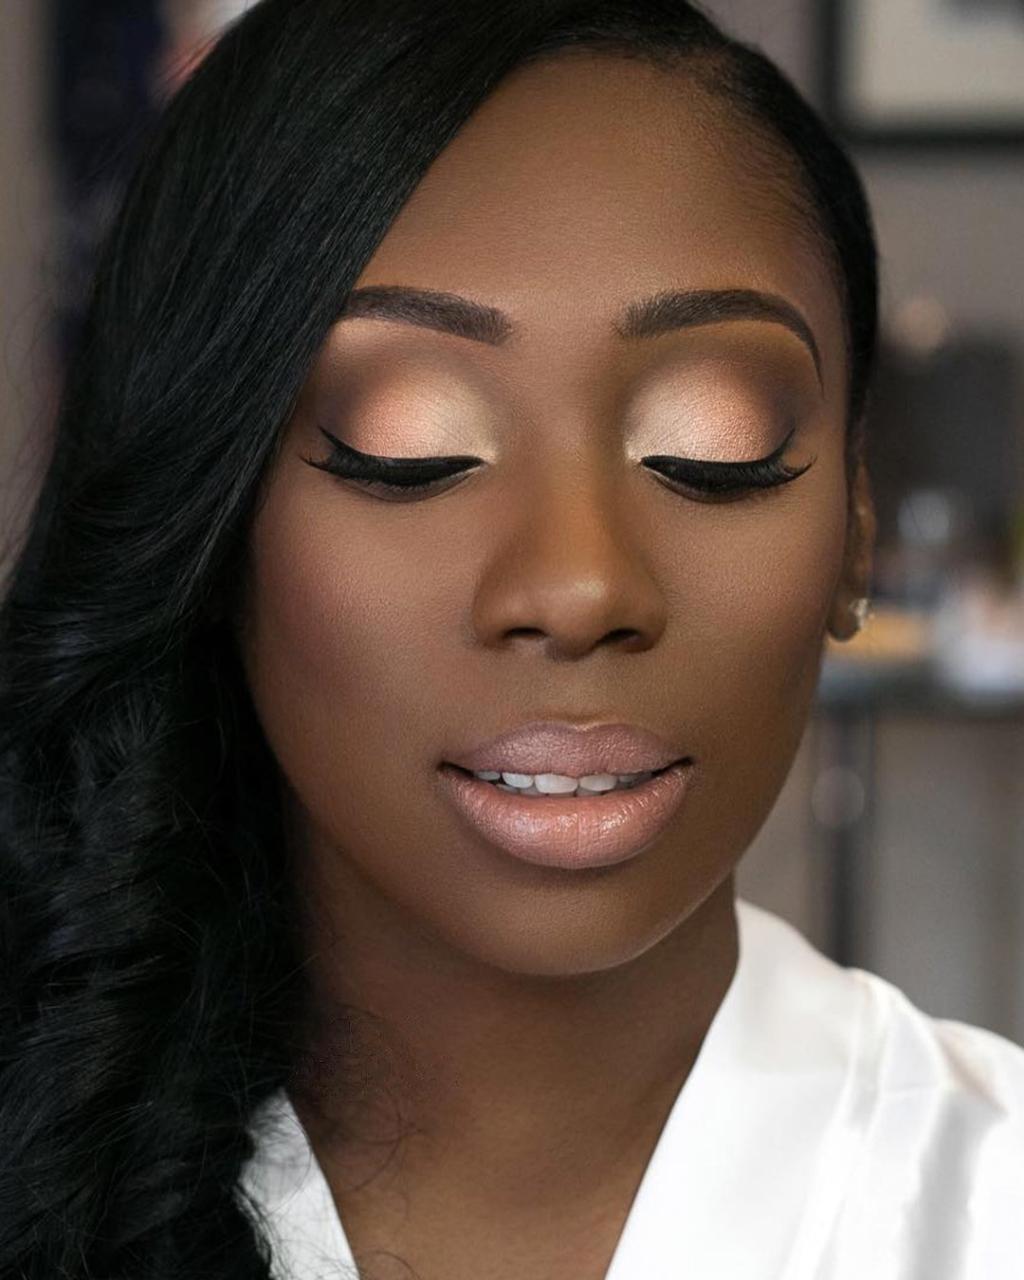 Black Bride Makeup Ideas 30 Top Styles For Wedding [2022 Guide]